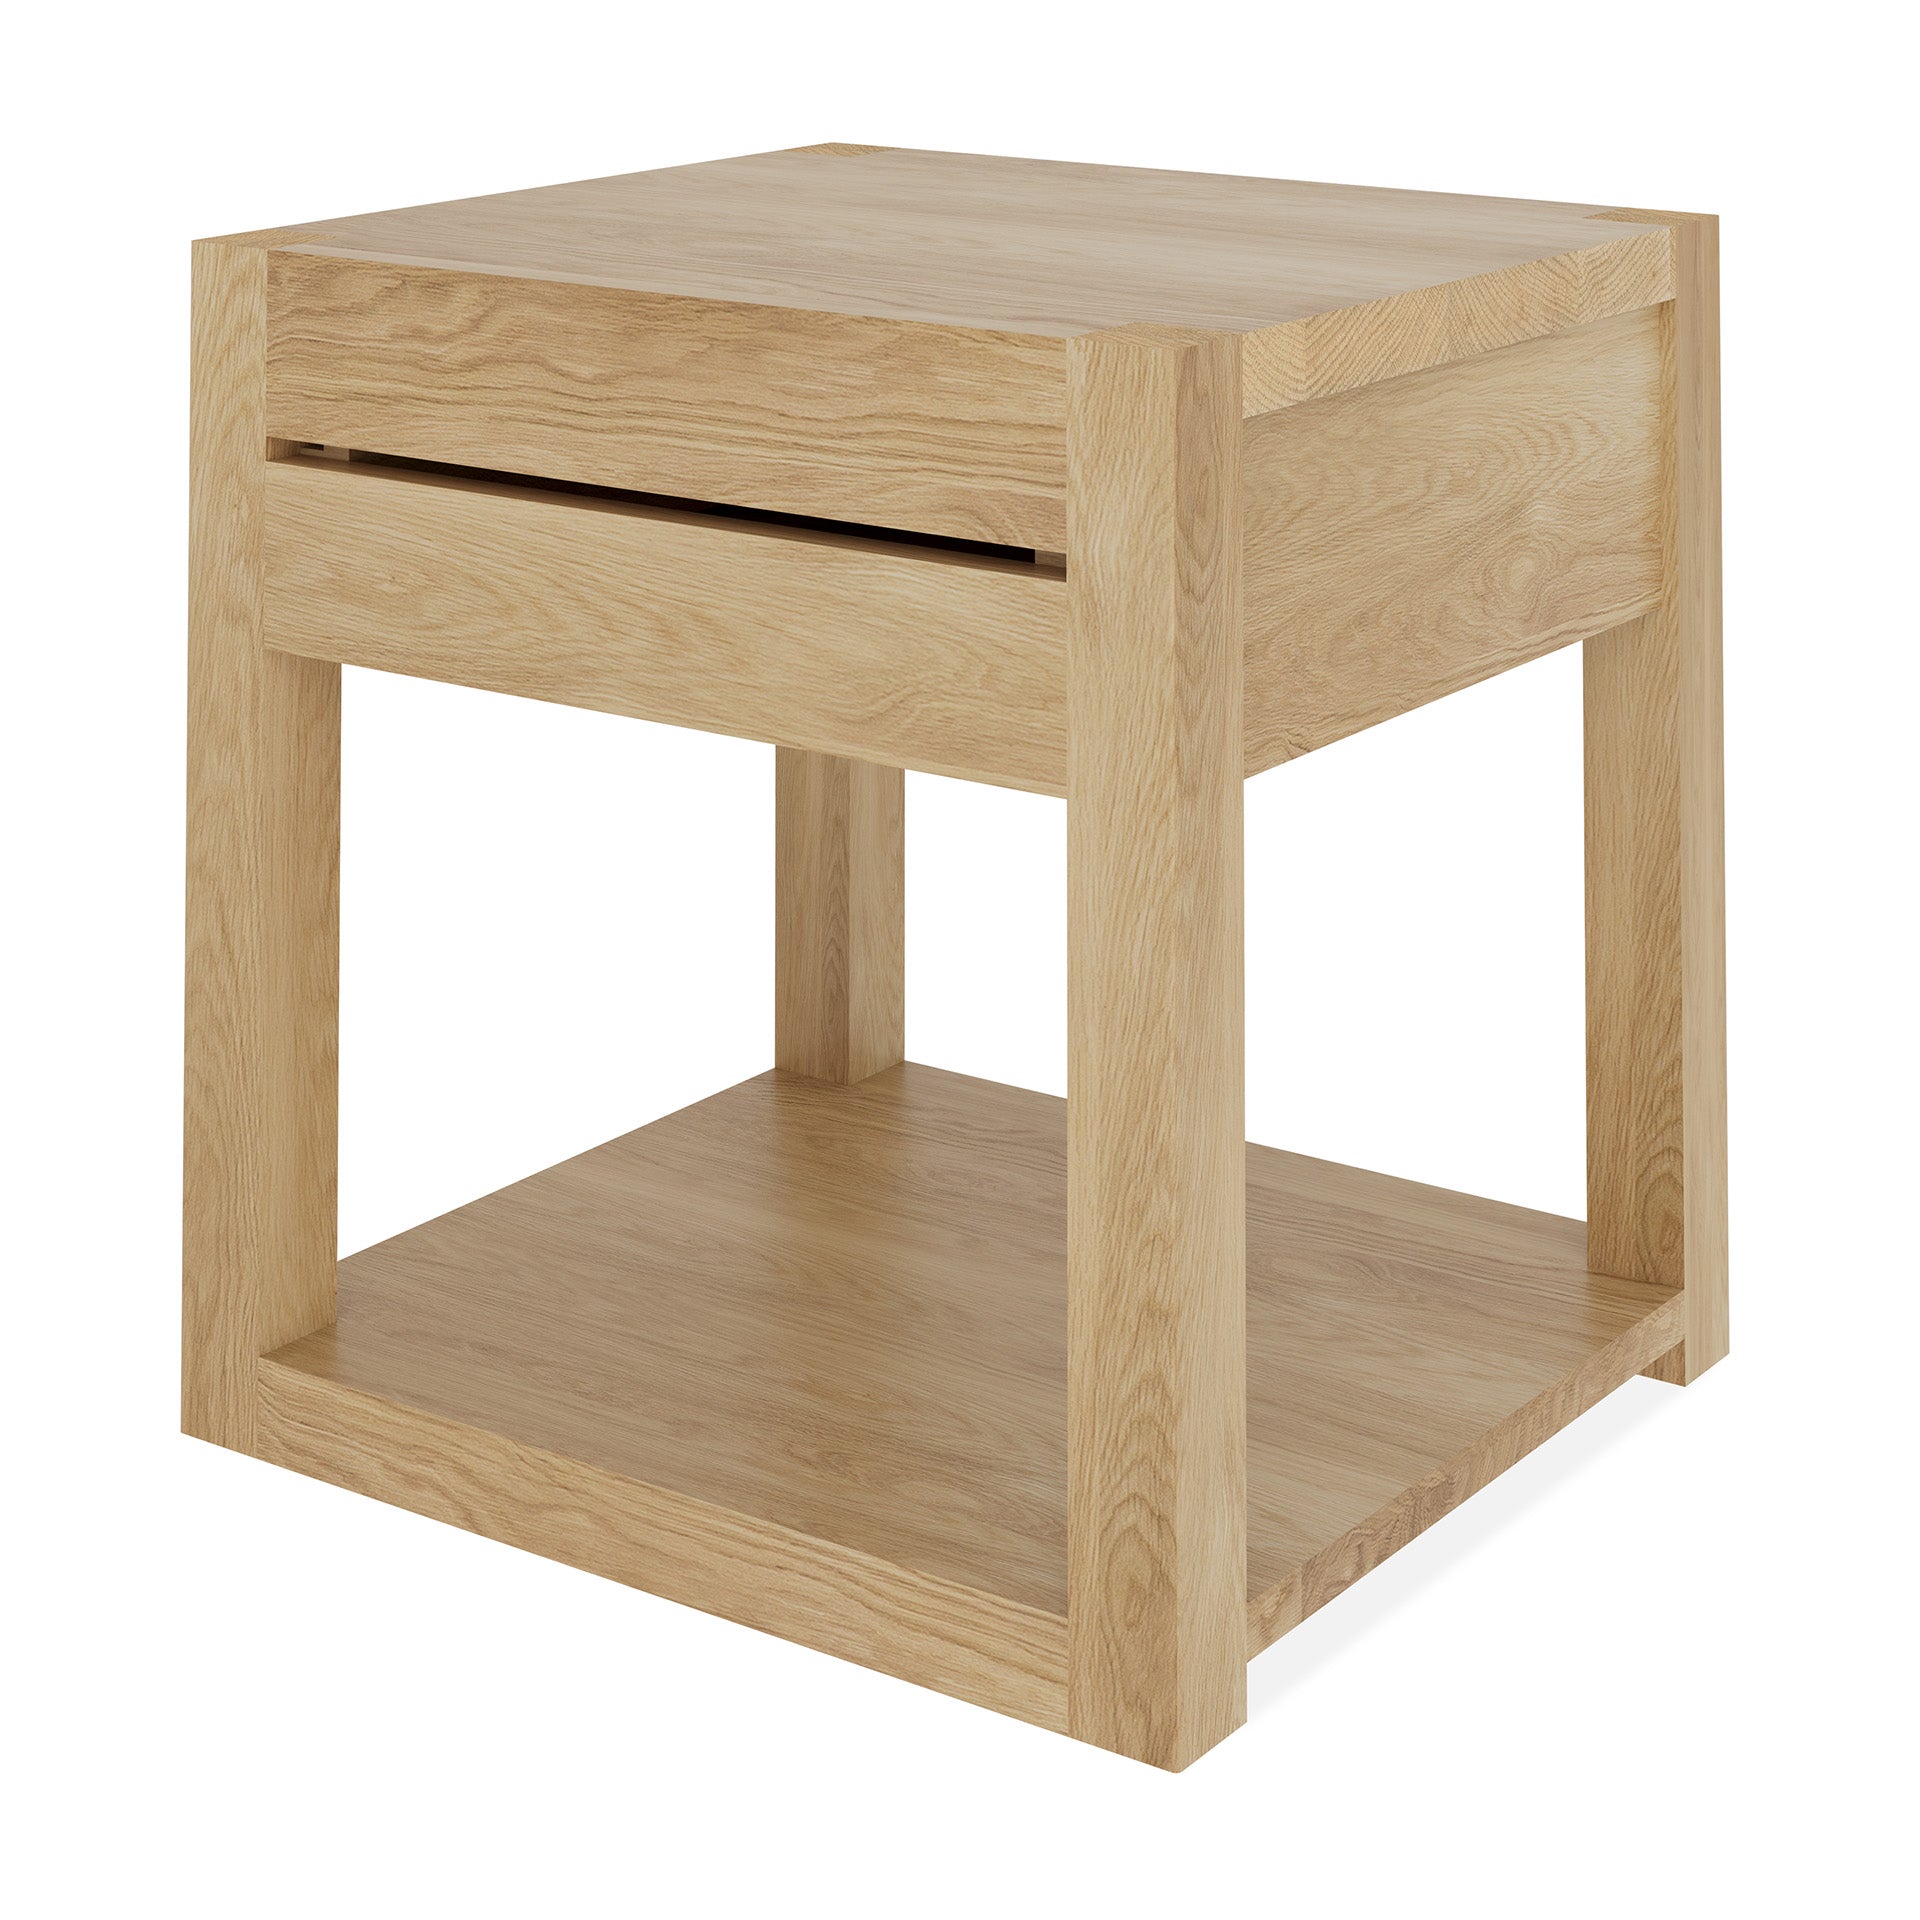 Ethnicraft Oak Azur Bedside Table is available from Make Your House A Home, Bendigo, Victoria, Australia